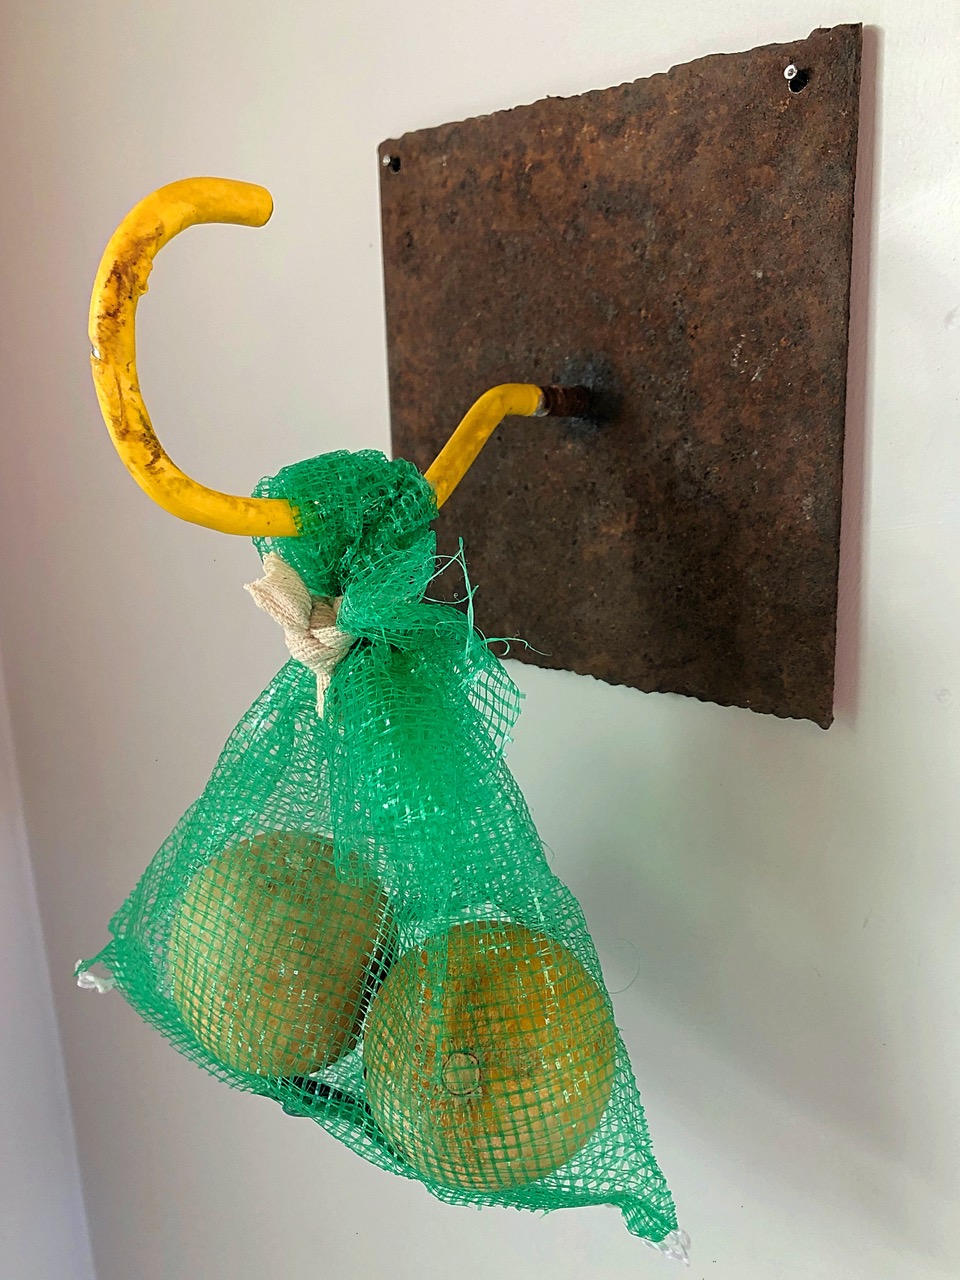 CLOSER, 2021 | Steel plate, utility hook, bag and gourds, 10” x 6” x 6” | 